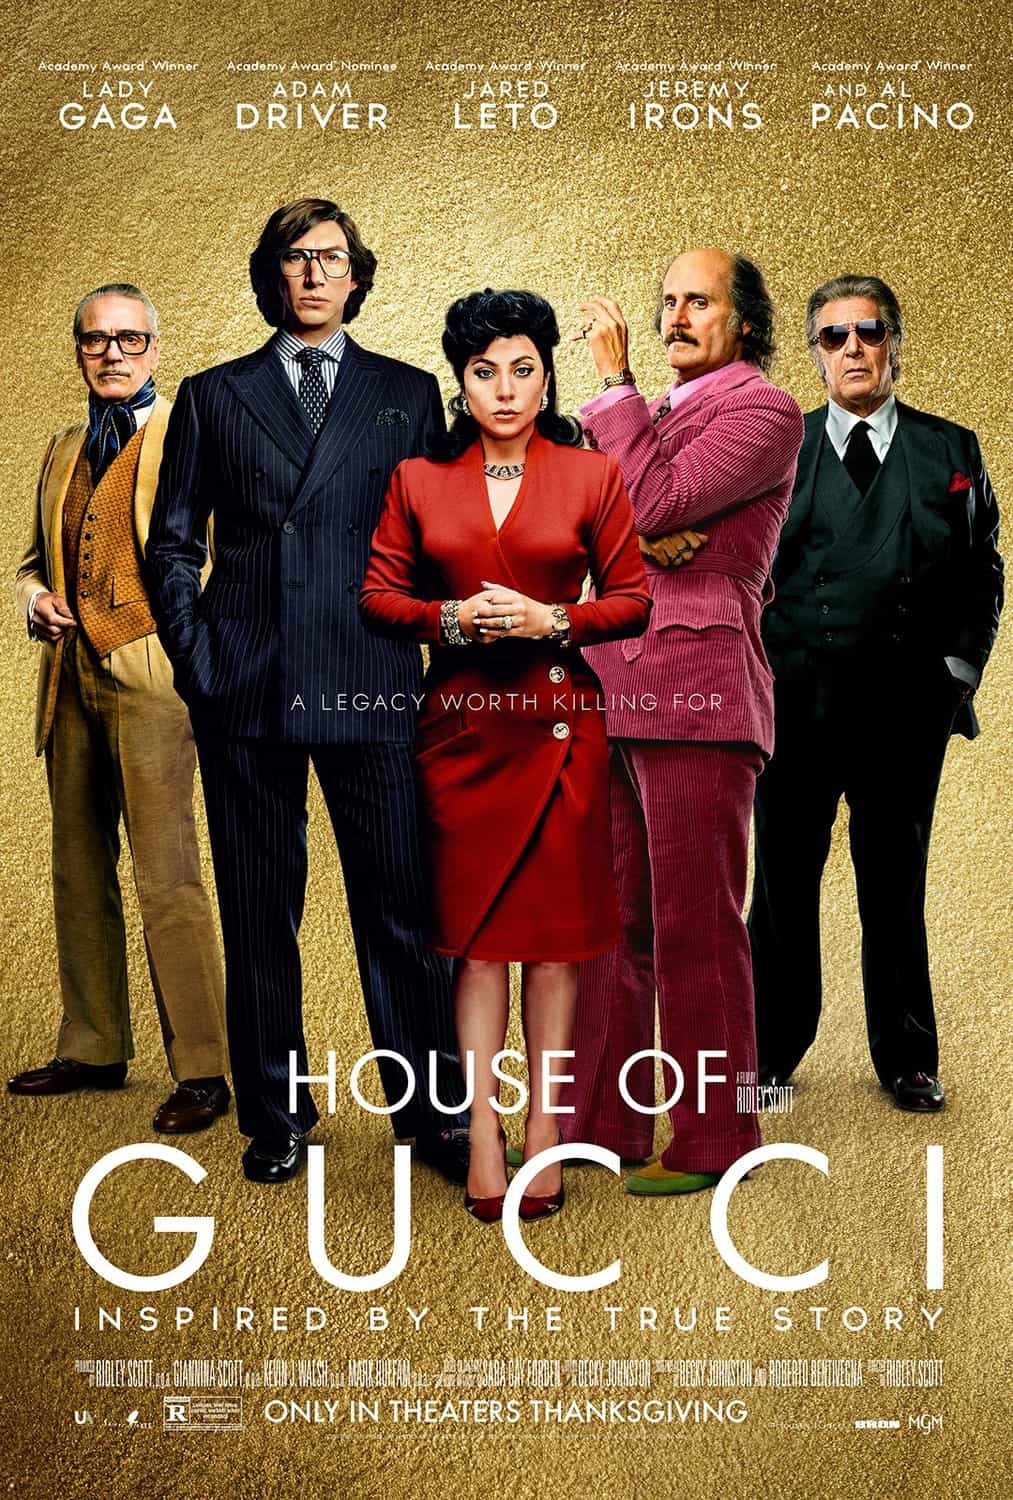 UK Box Office Weekend Report 3rd - 5th December 2021:  House of Gucci remains at the top while a Christmas with Andre is the top new movie